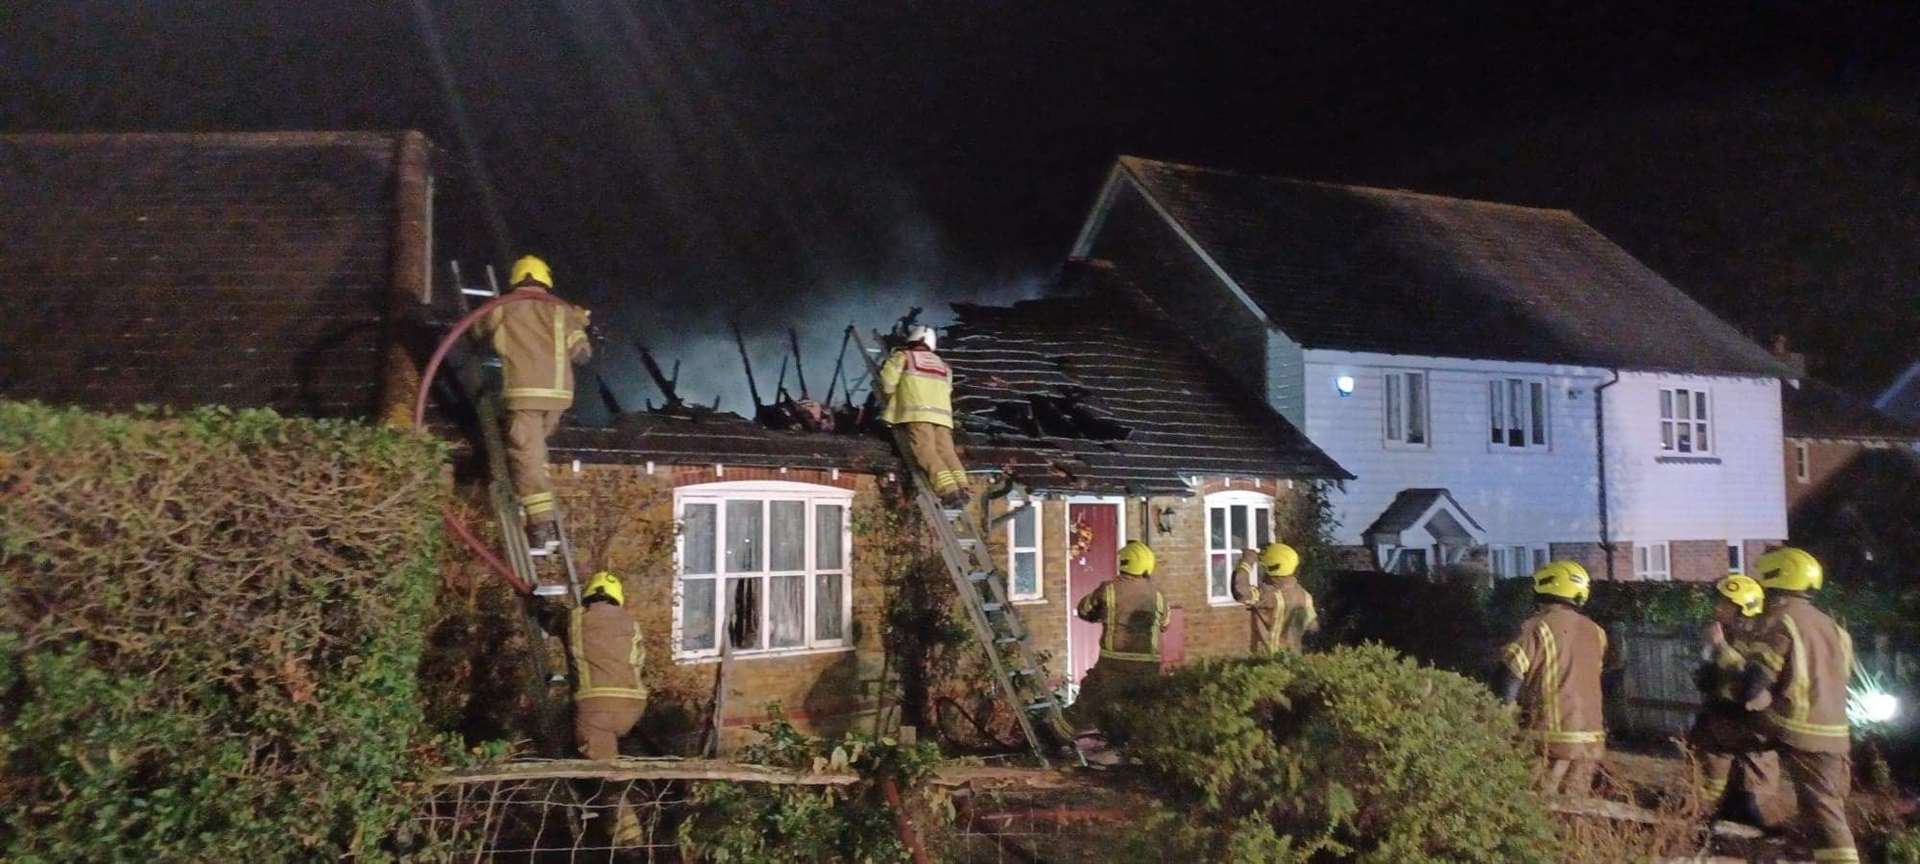 Firefighters tackled the blazing bungalow in Sheppey Way, Iwade. Picture: Hollie O'Neil